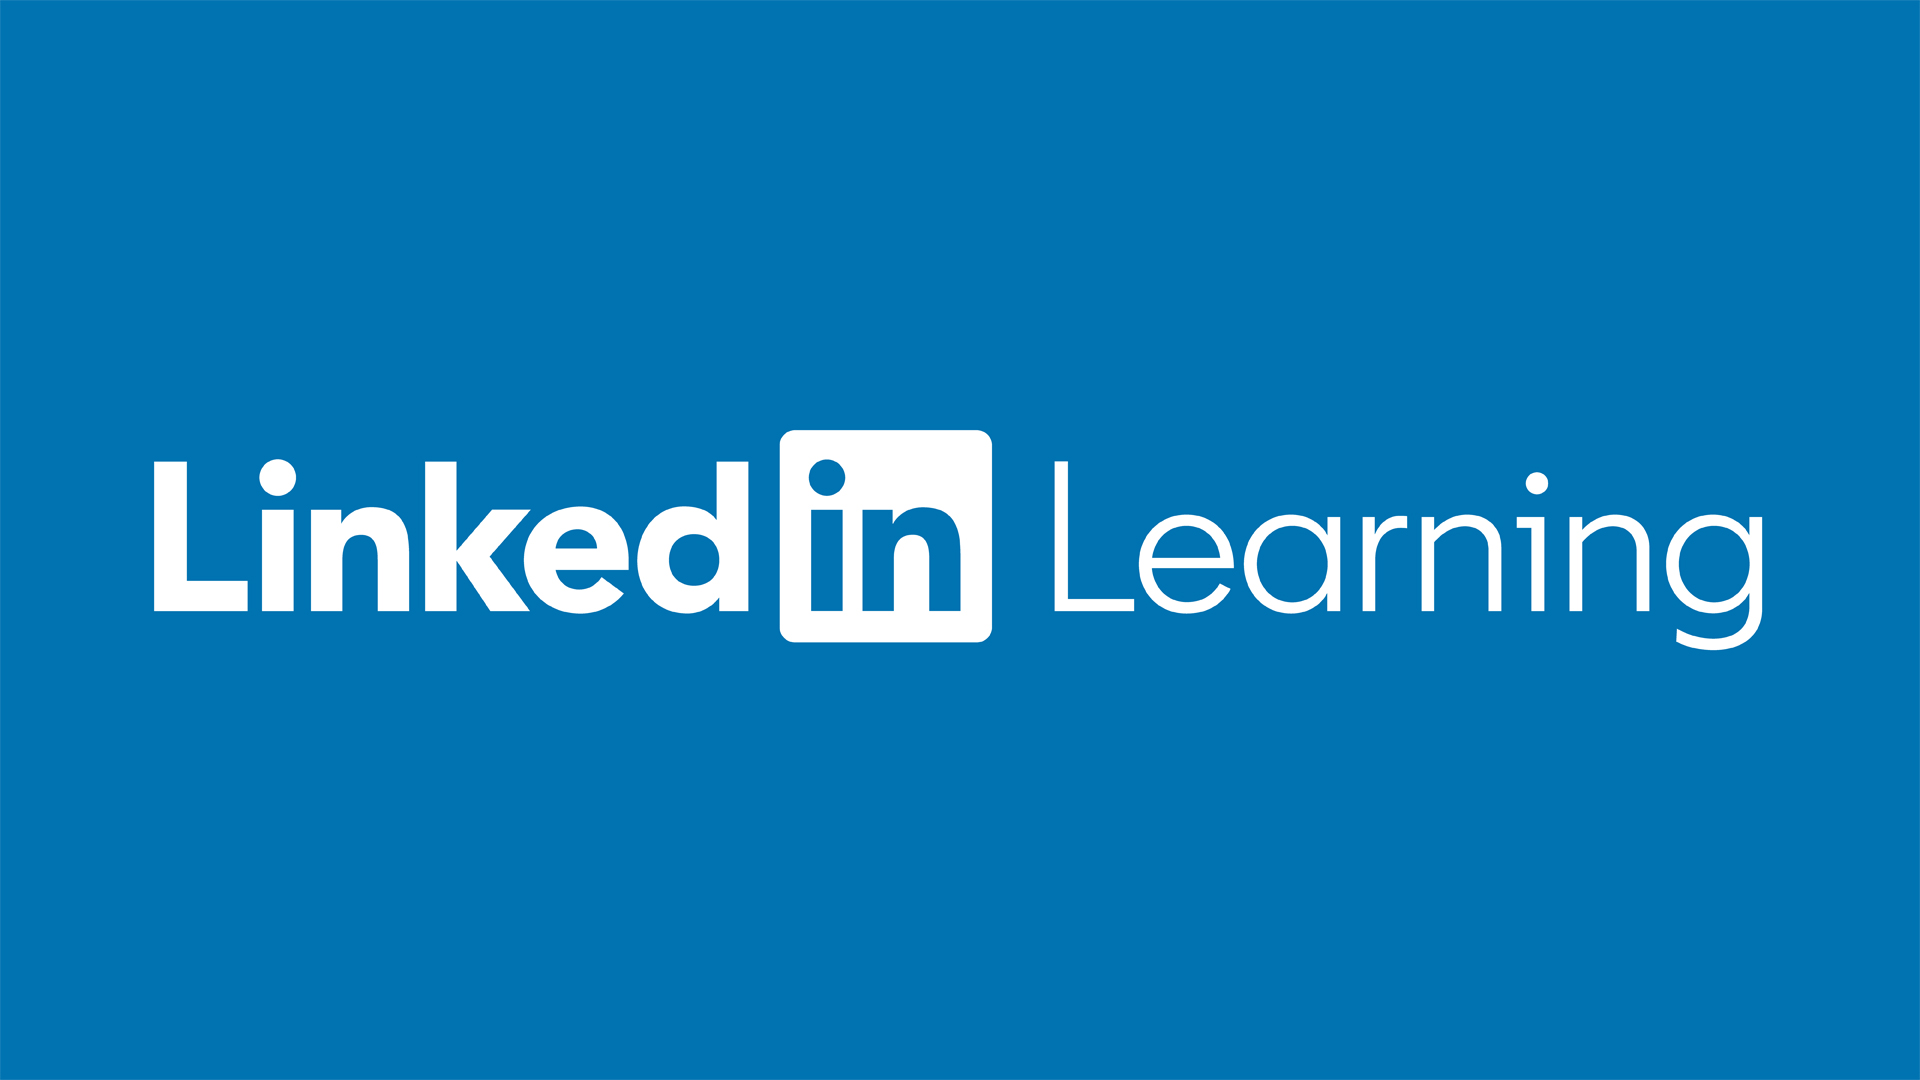 Click for LinkedIn Learning, formerly known as Lynda.com